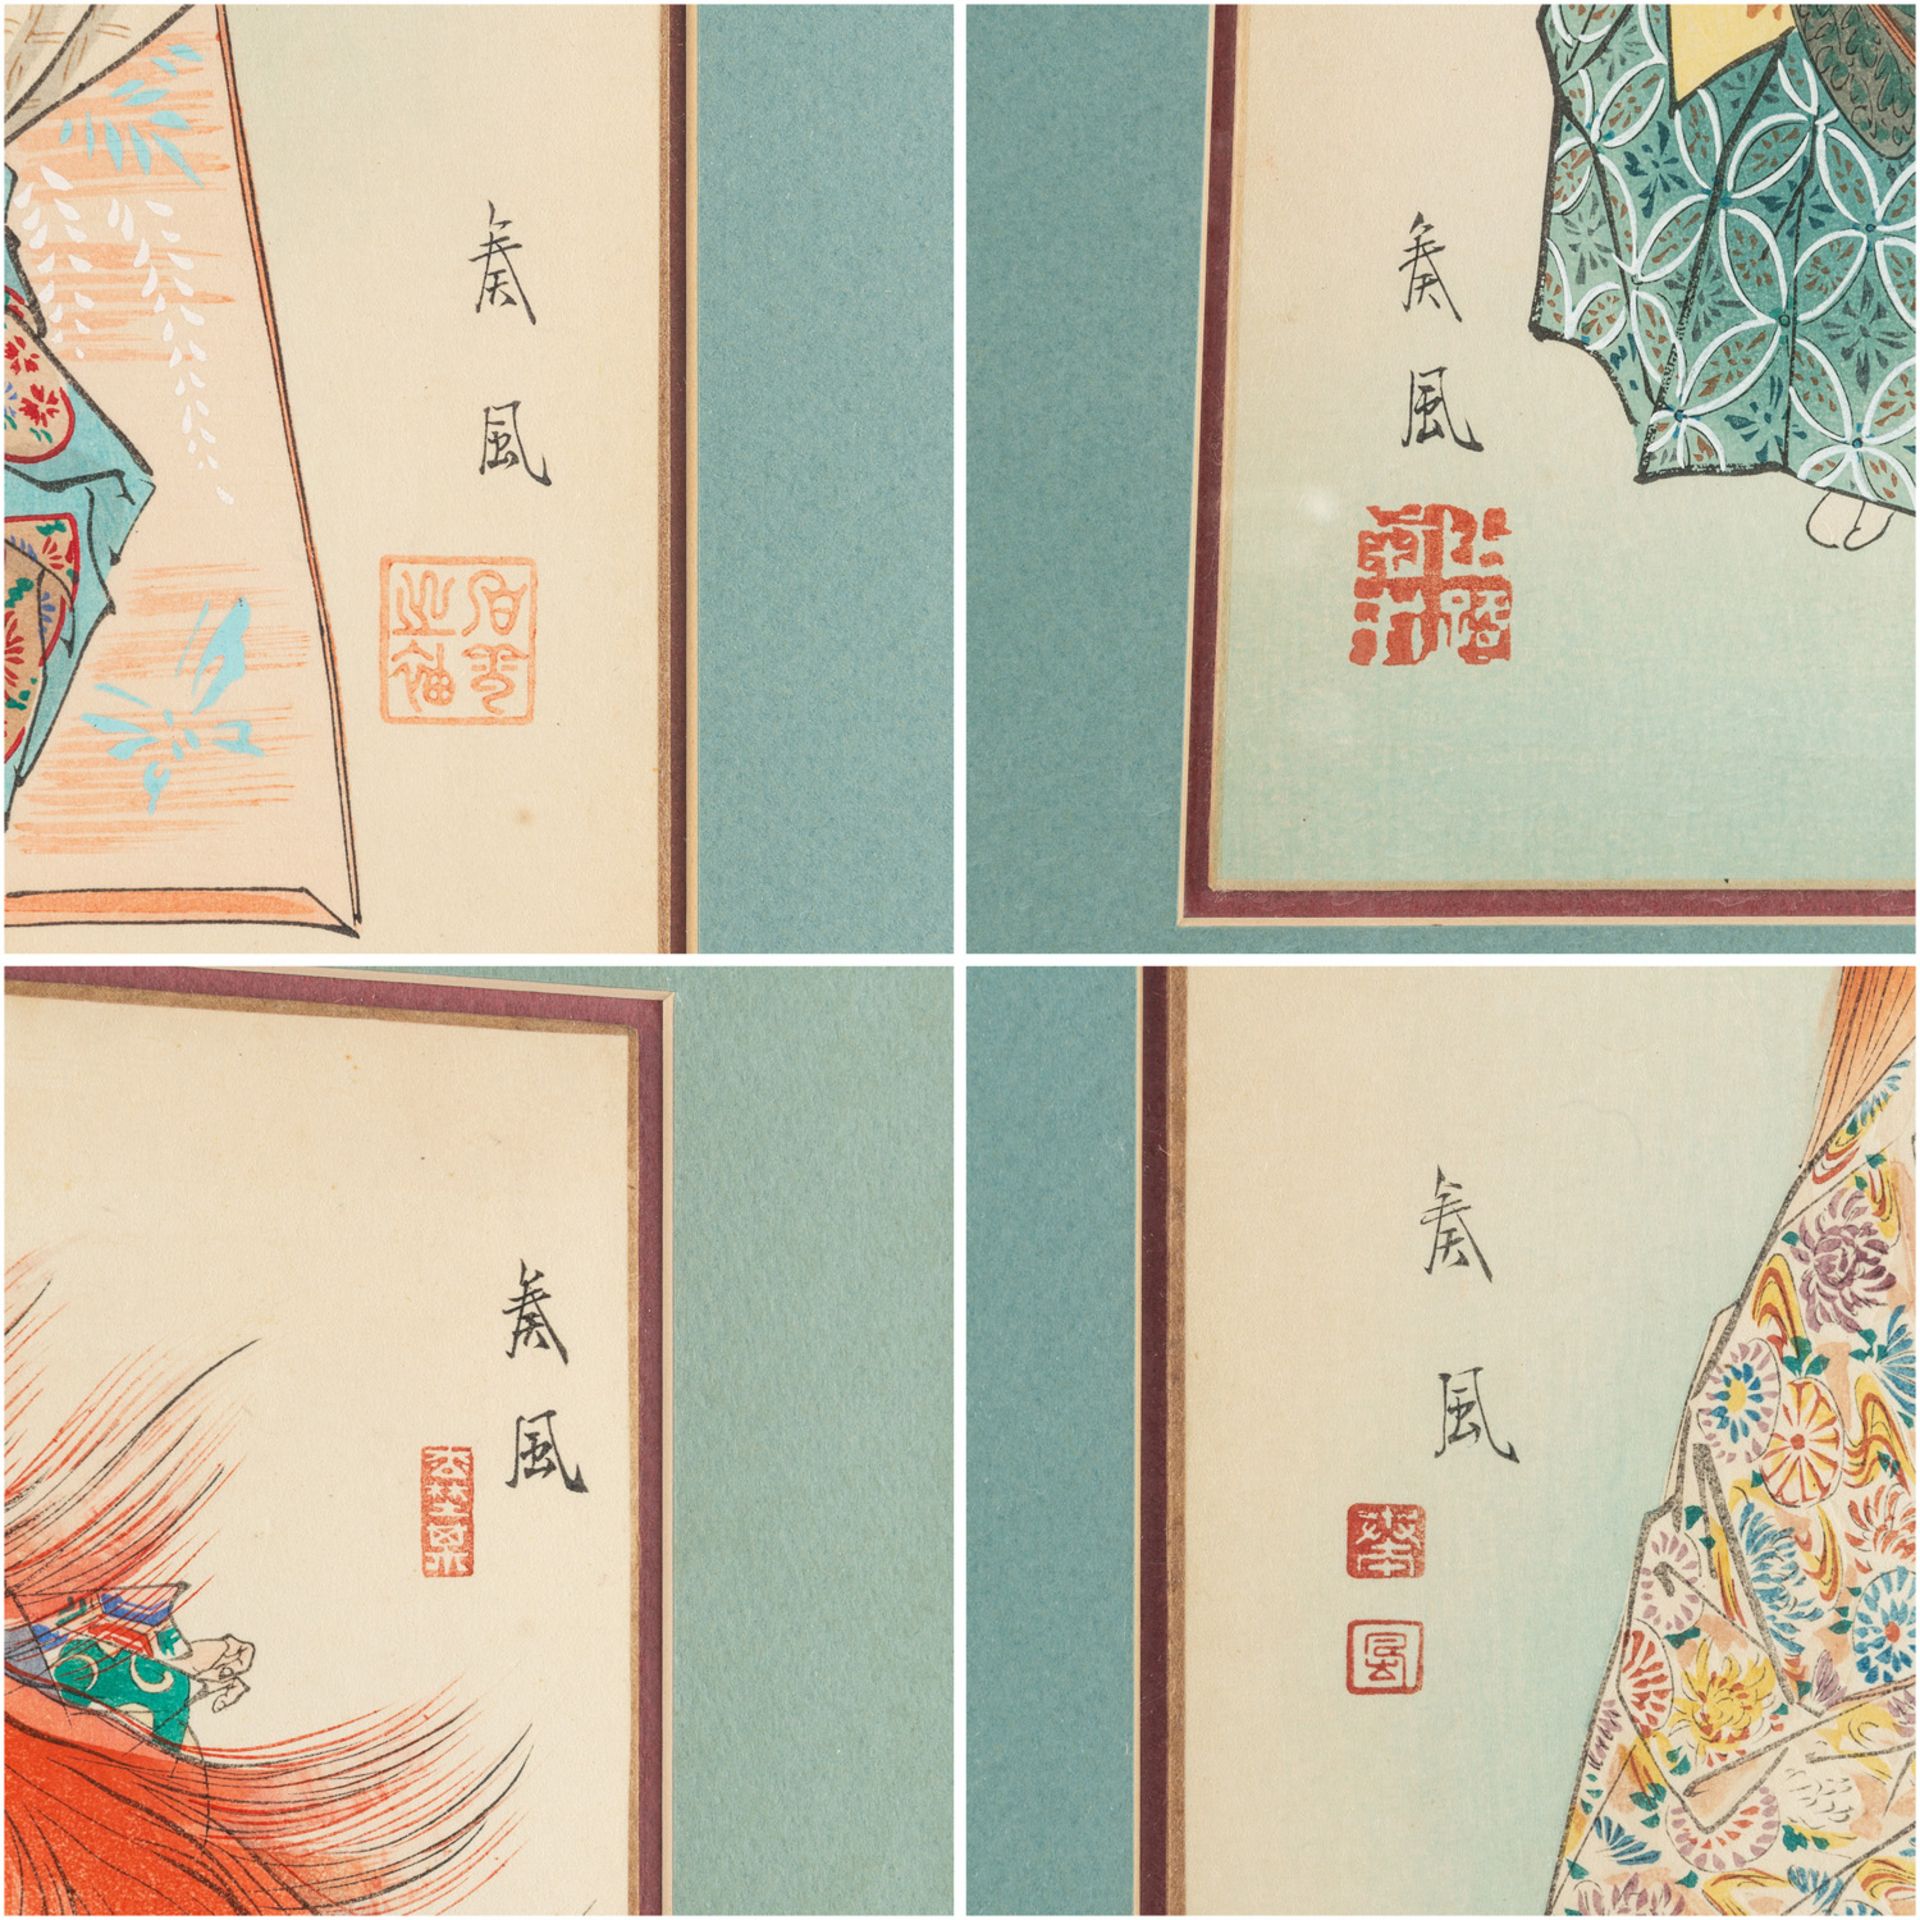 A GROUP OF FOUR WOODBLOCK PRINTS BY MATSUNO SOFU (1899-1963) FROM NOH TWELVE MONTHS SERIES, 1956 - Bild 7 aus 7